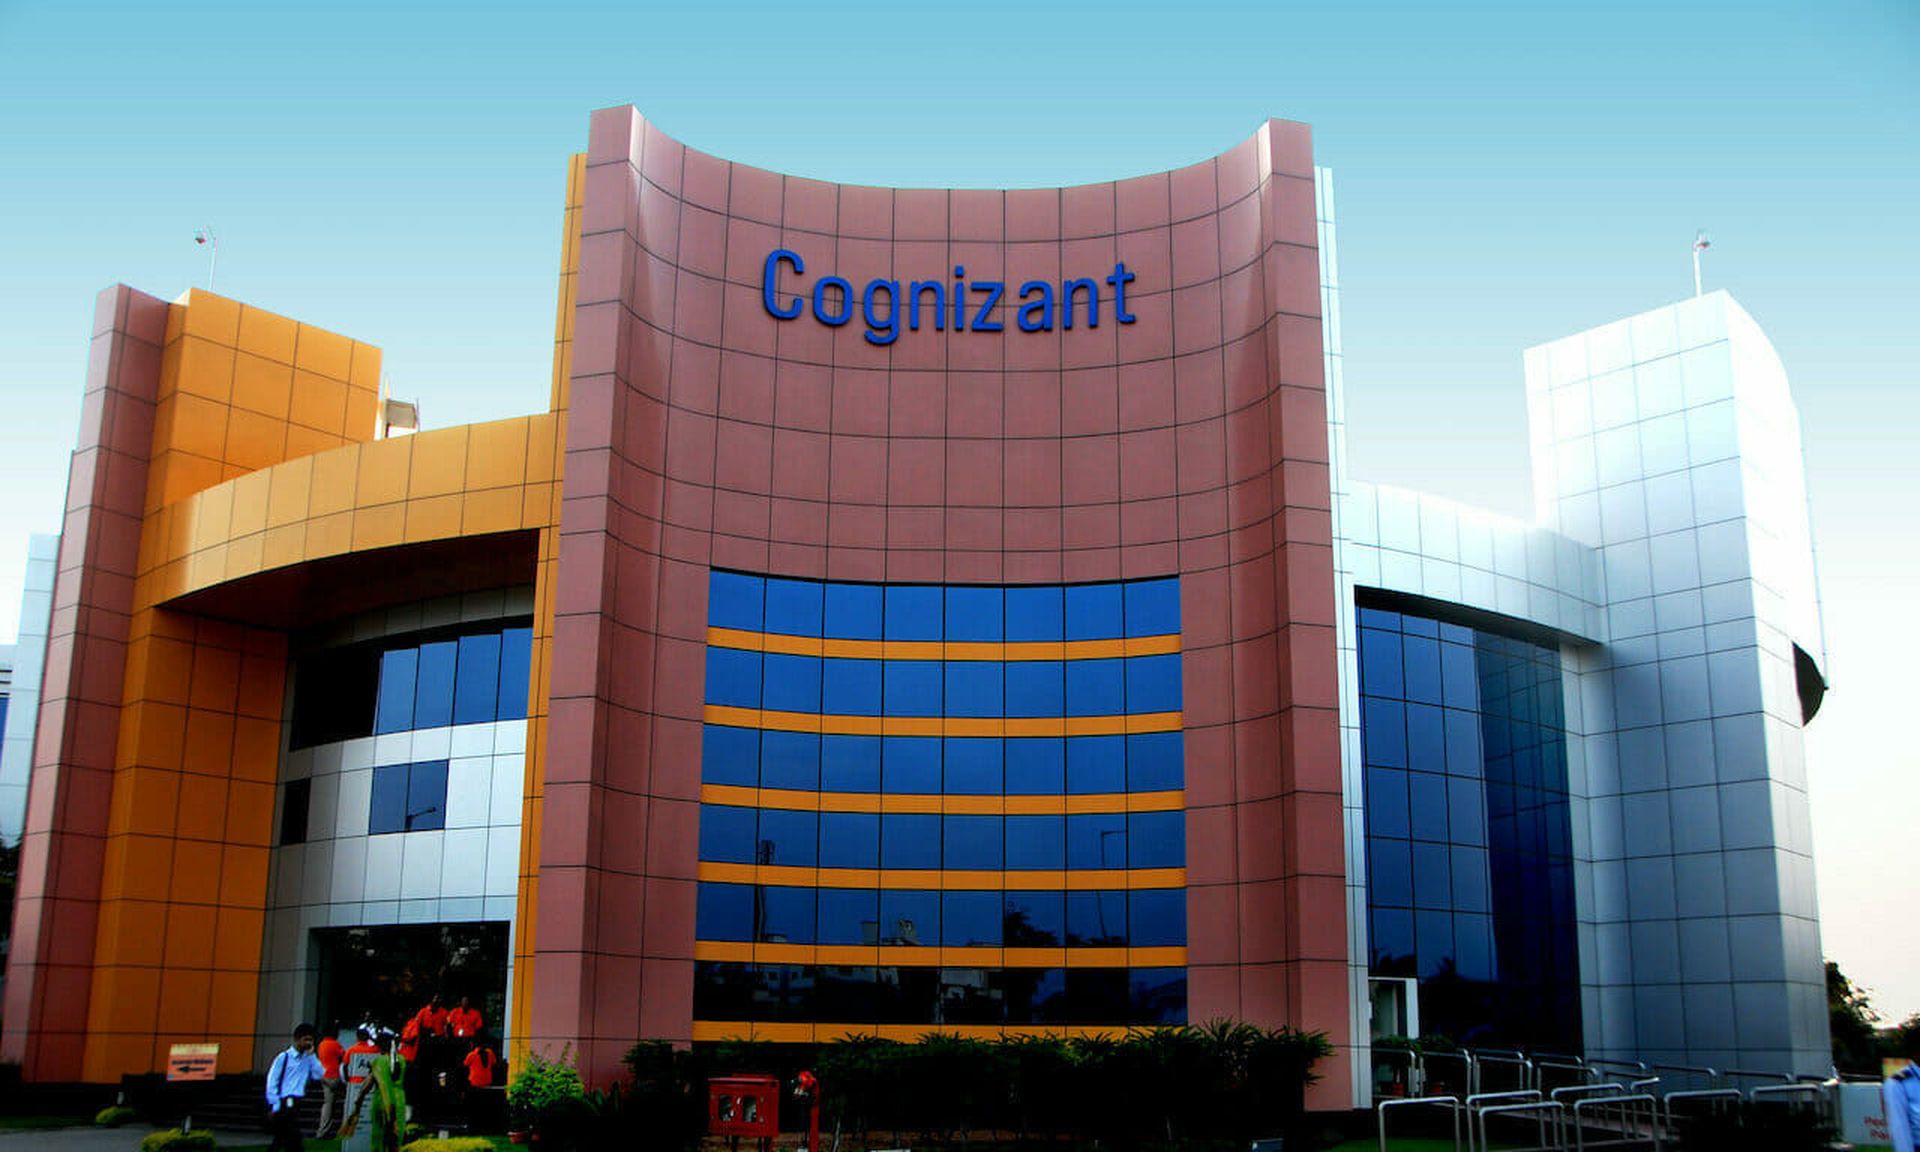 Cognizant reportedly spent up to $70 million to remediate a Maze ransomware attack. Today’s columnist, Jerome Robert of Alsid, offers a fictitious account of what motivated the Maze operators and theorizes why they closed shop.